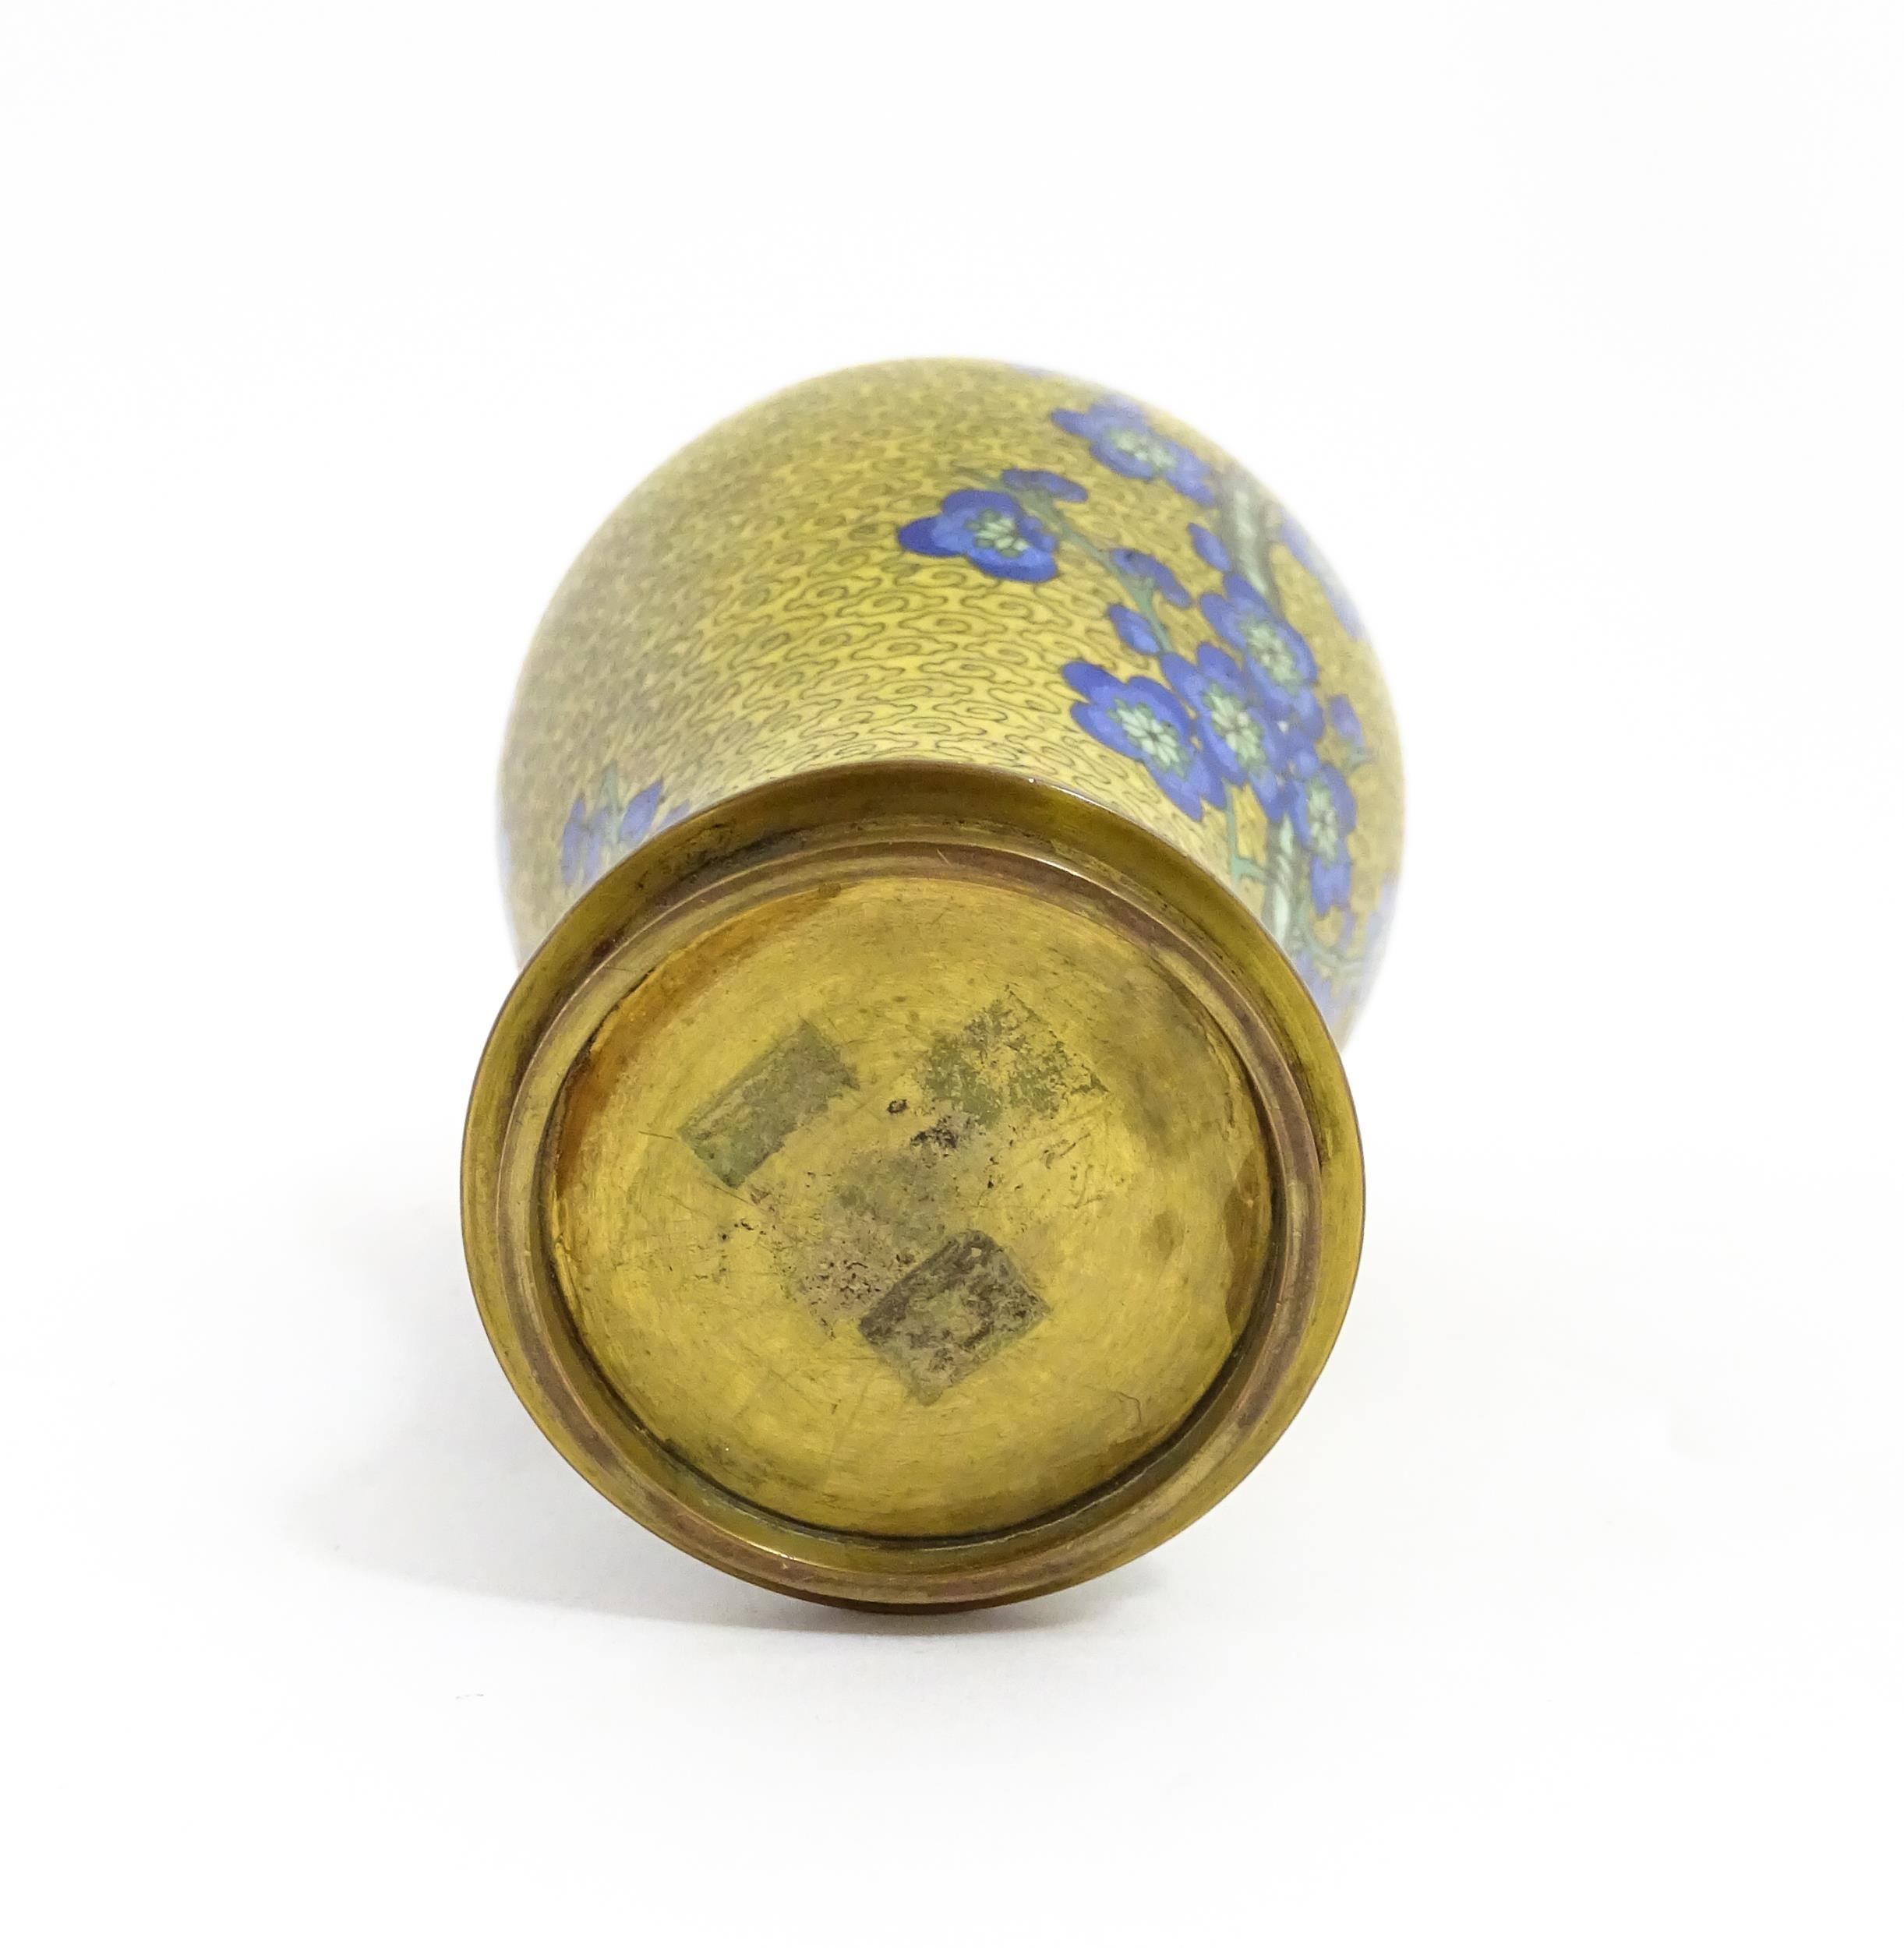 A Chinese cloisonne vase with a yellow ground decorated with blue prunus flowers / blossom. - Image 6 of 7